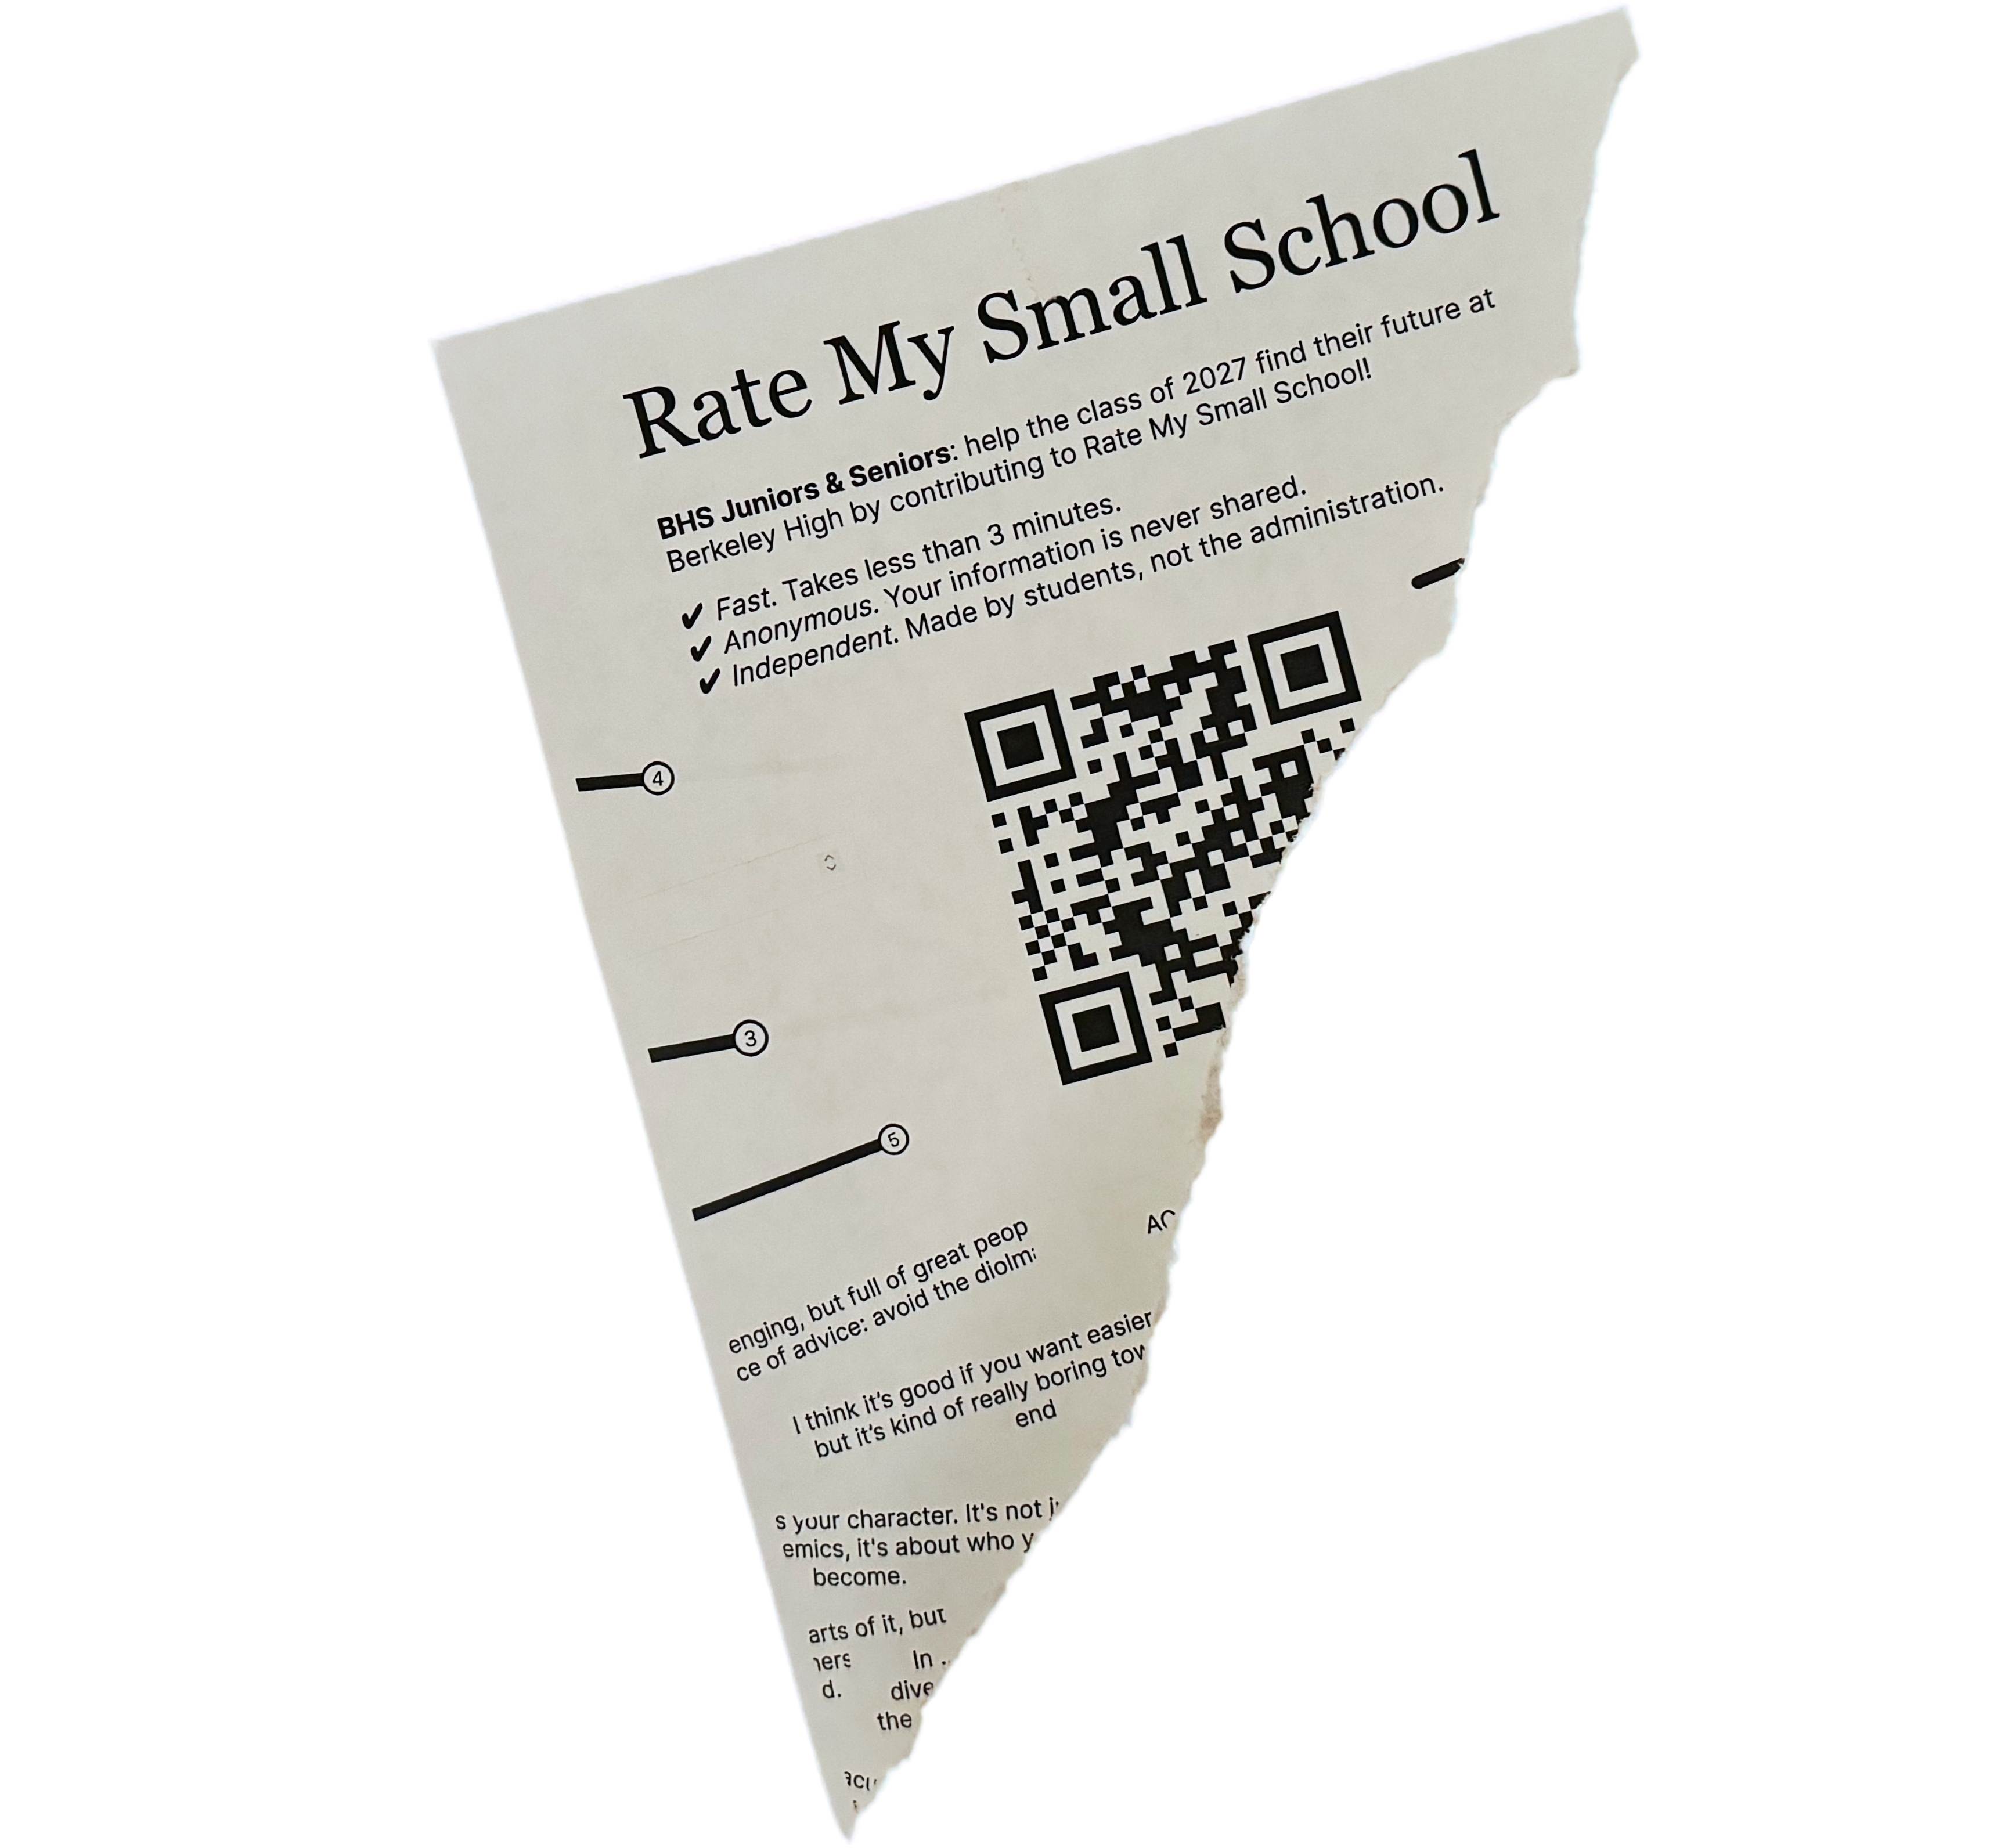 A torn poster with the title "Rate My Small School" hanging lopsided on a wall